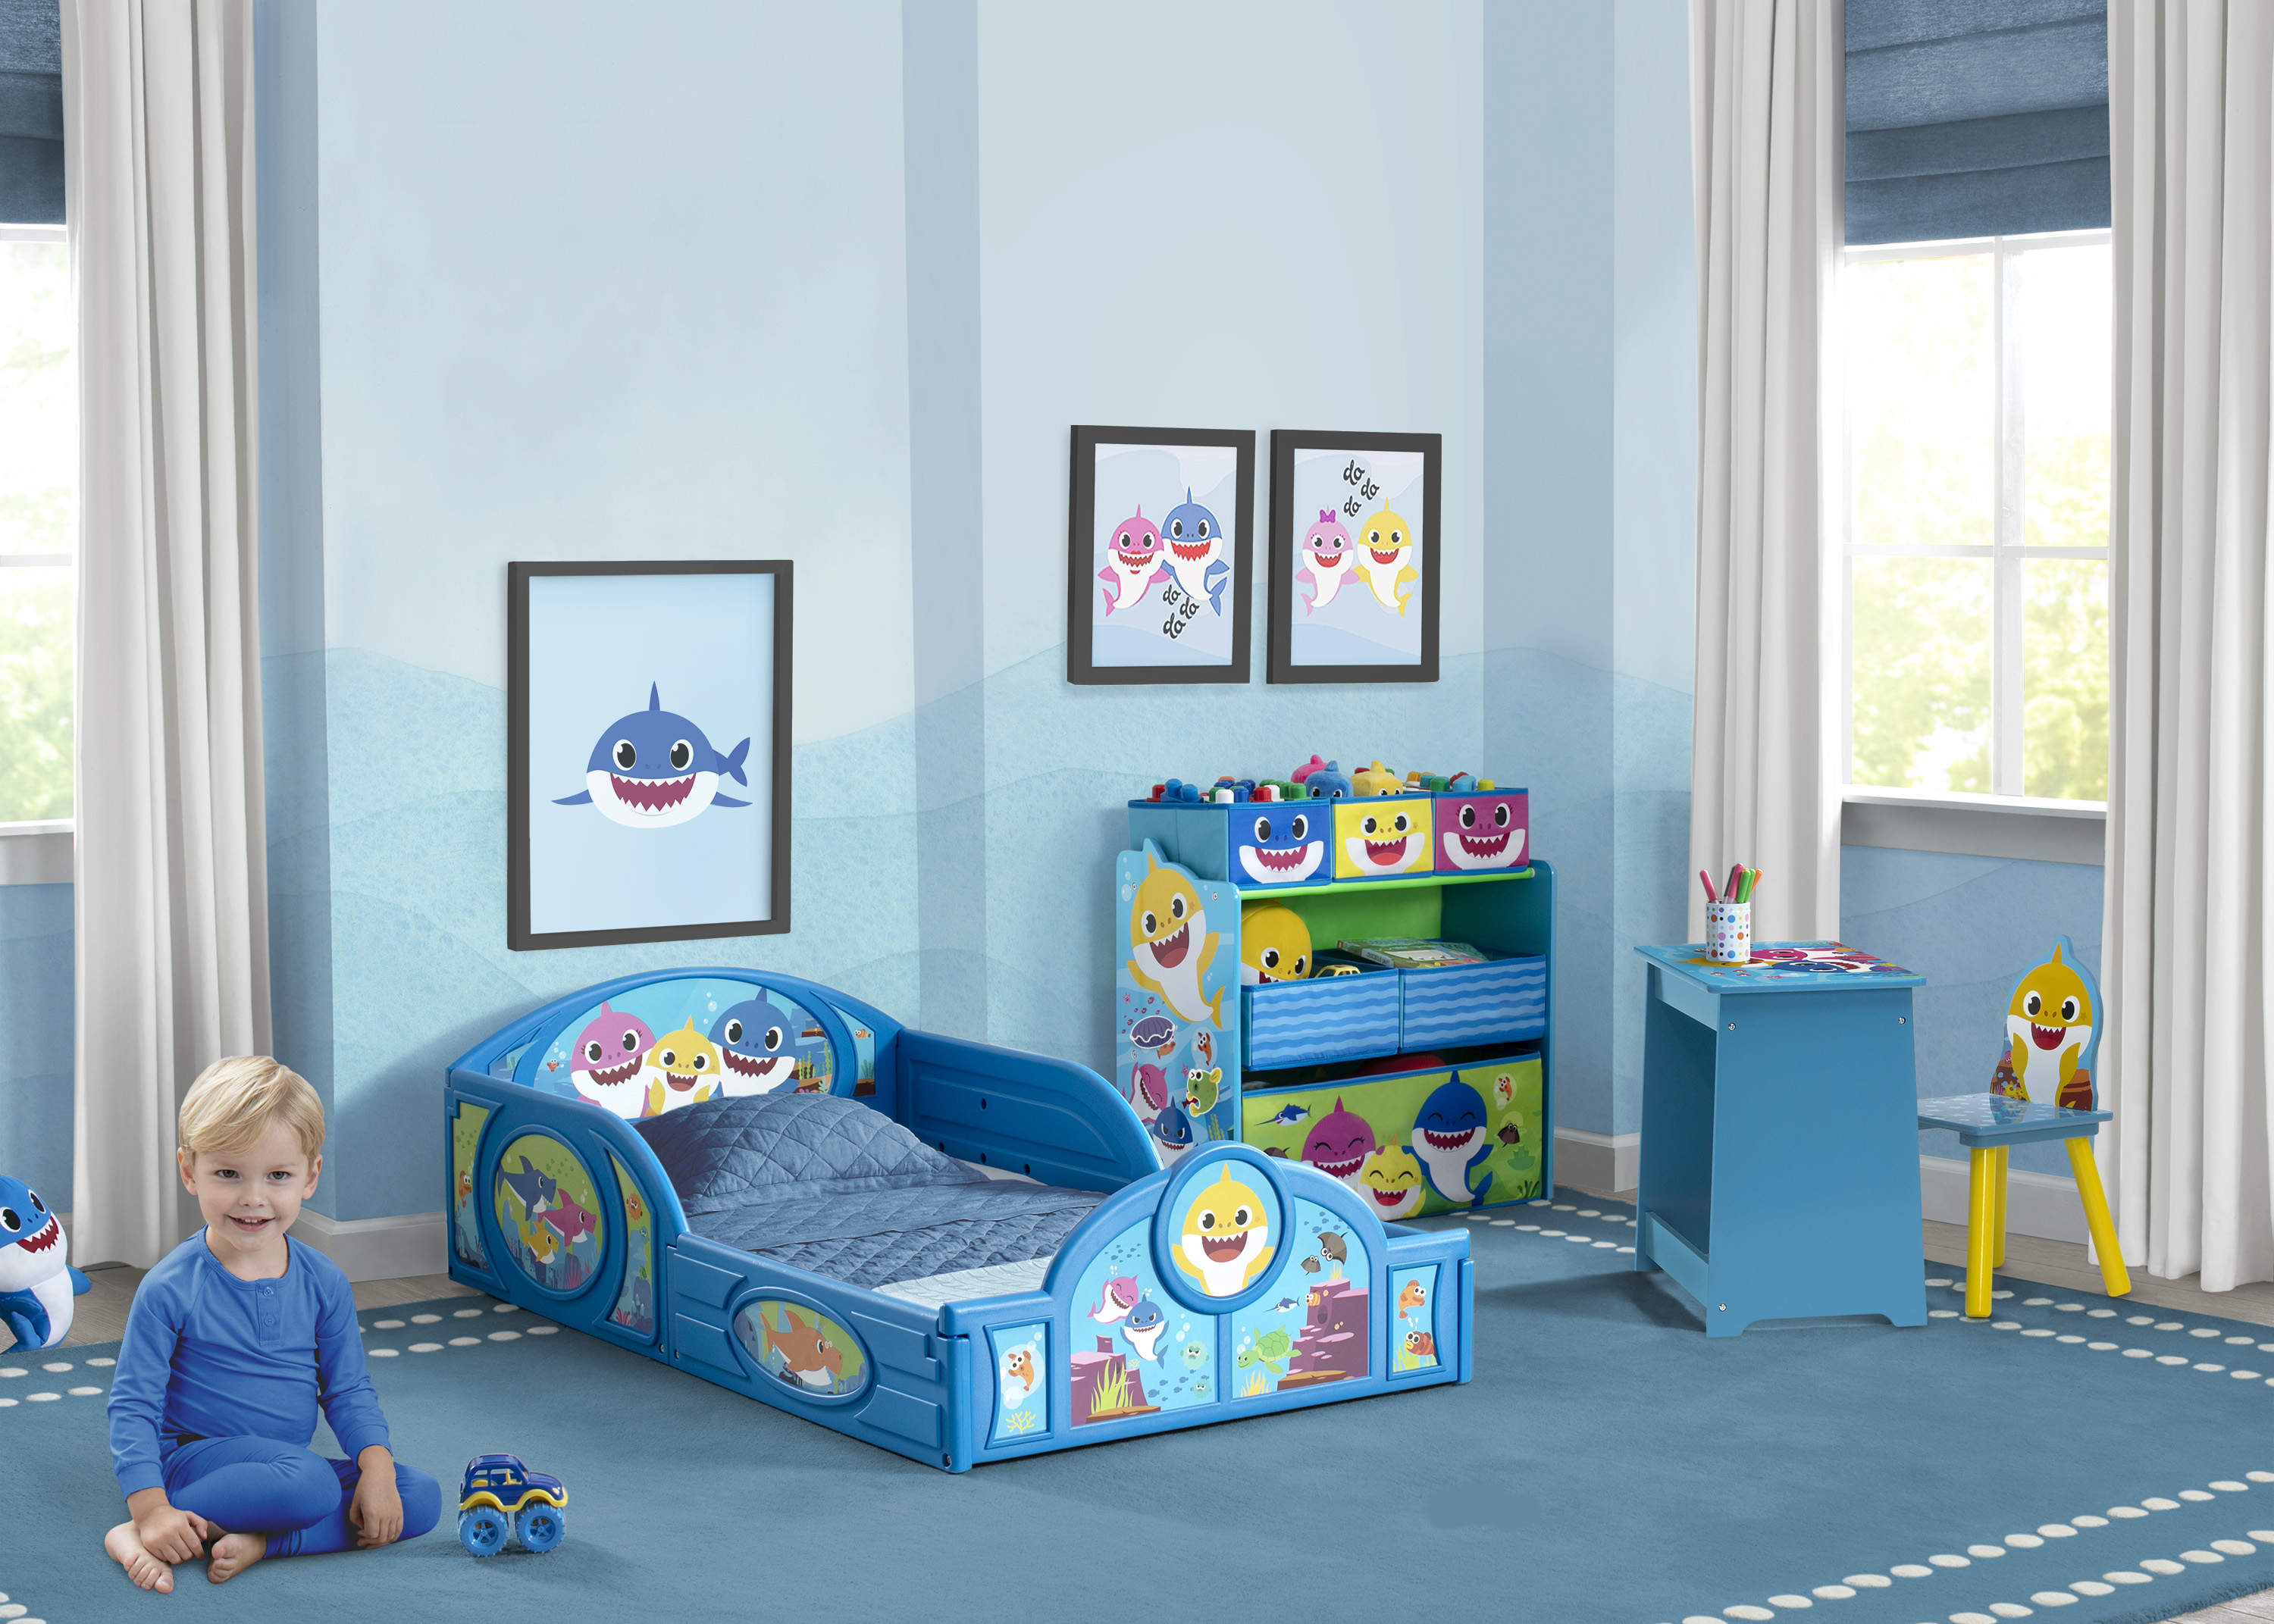 Baby Shark 4-Piece Room-in-a-Box Bedroom Set by Delta Children - Includes Sleep & Play Toddler Bed, 6 Bin Design & Store Toy Organizer and Art Desk with Chair - image 4 of 19